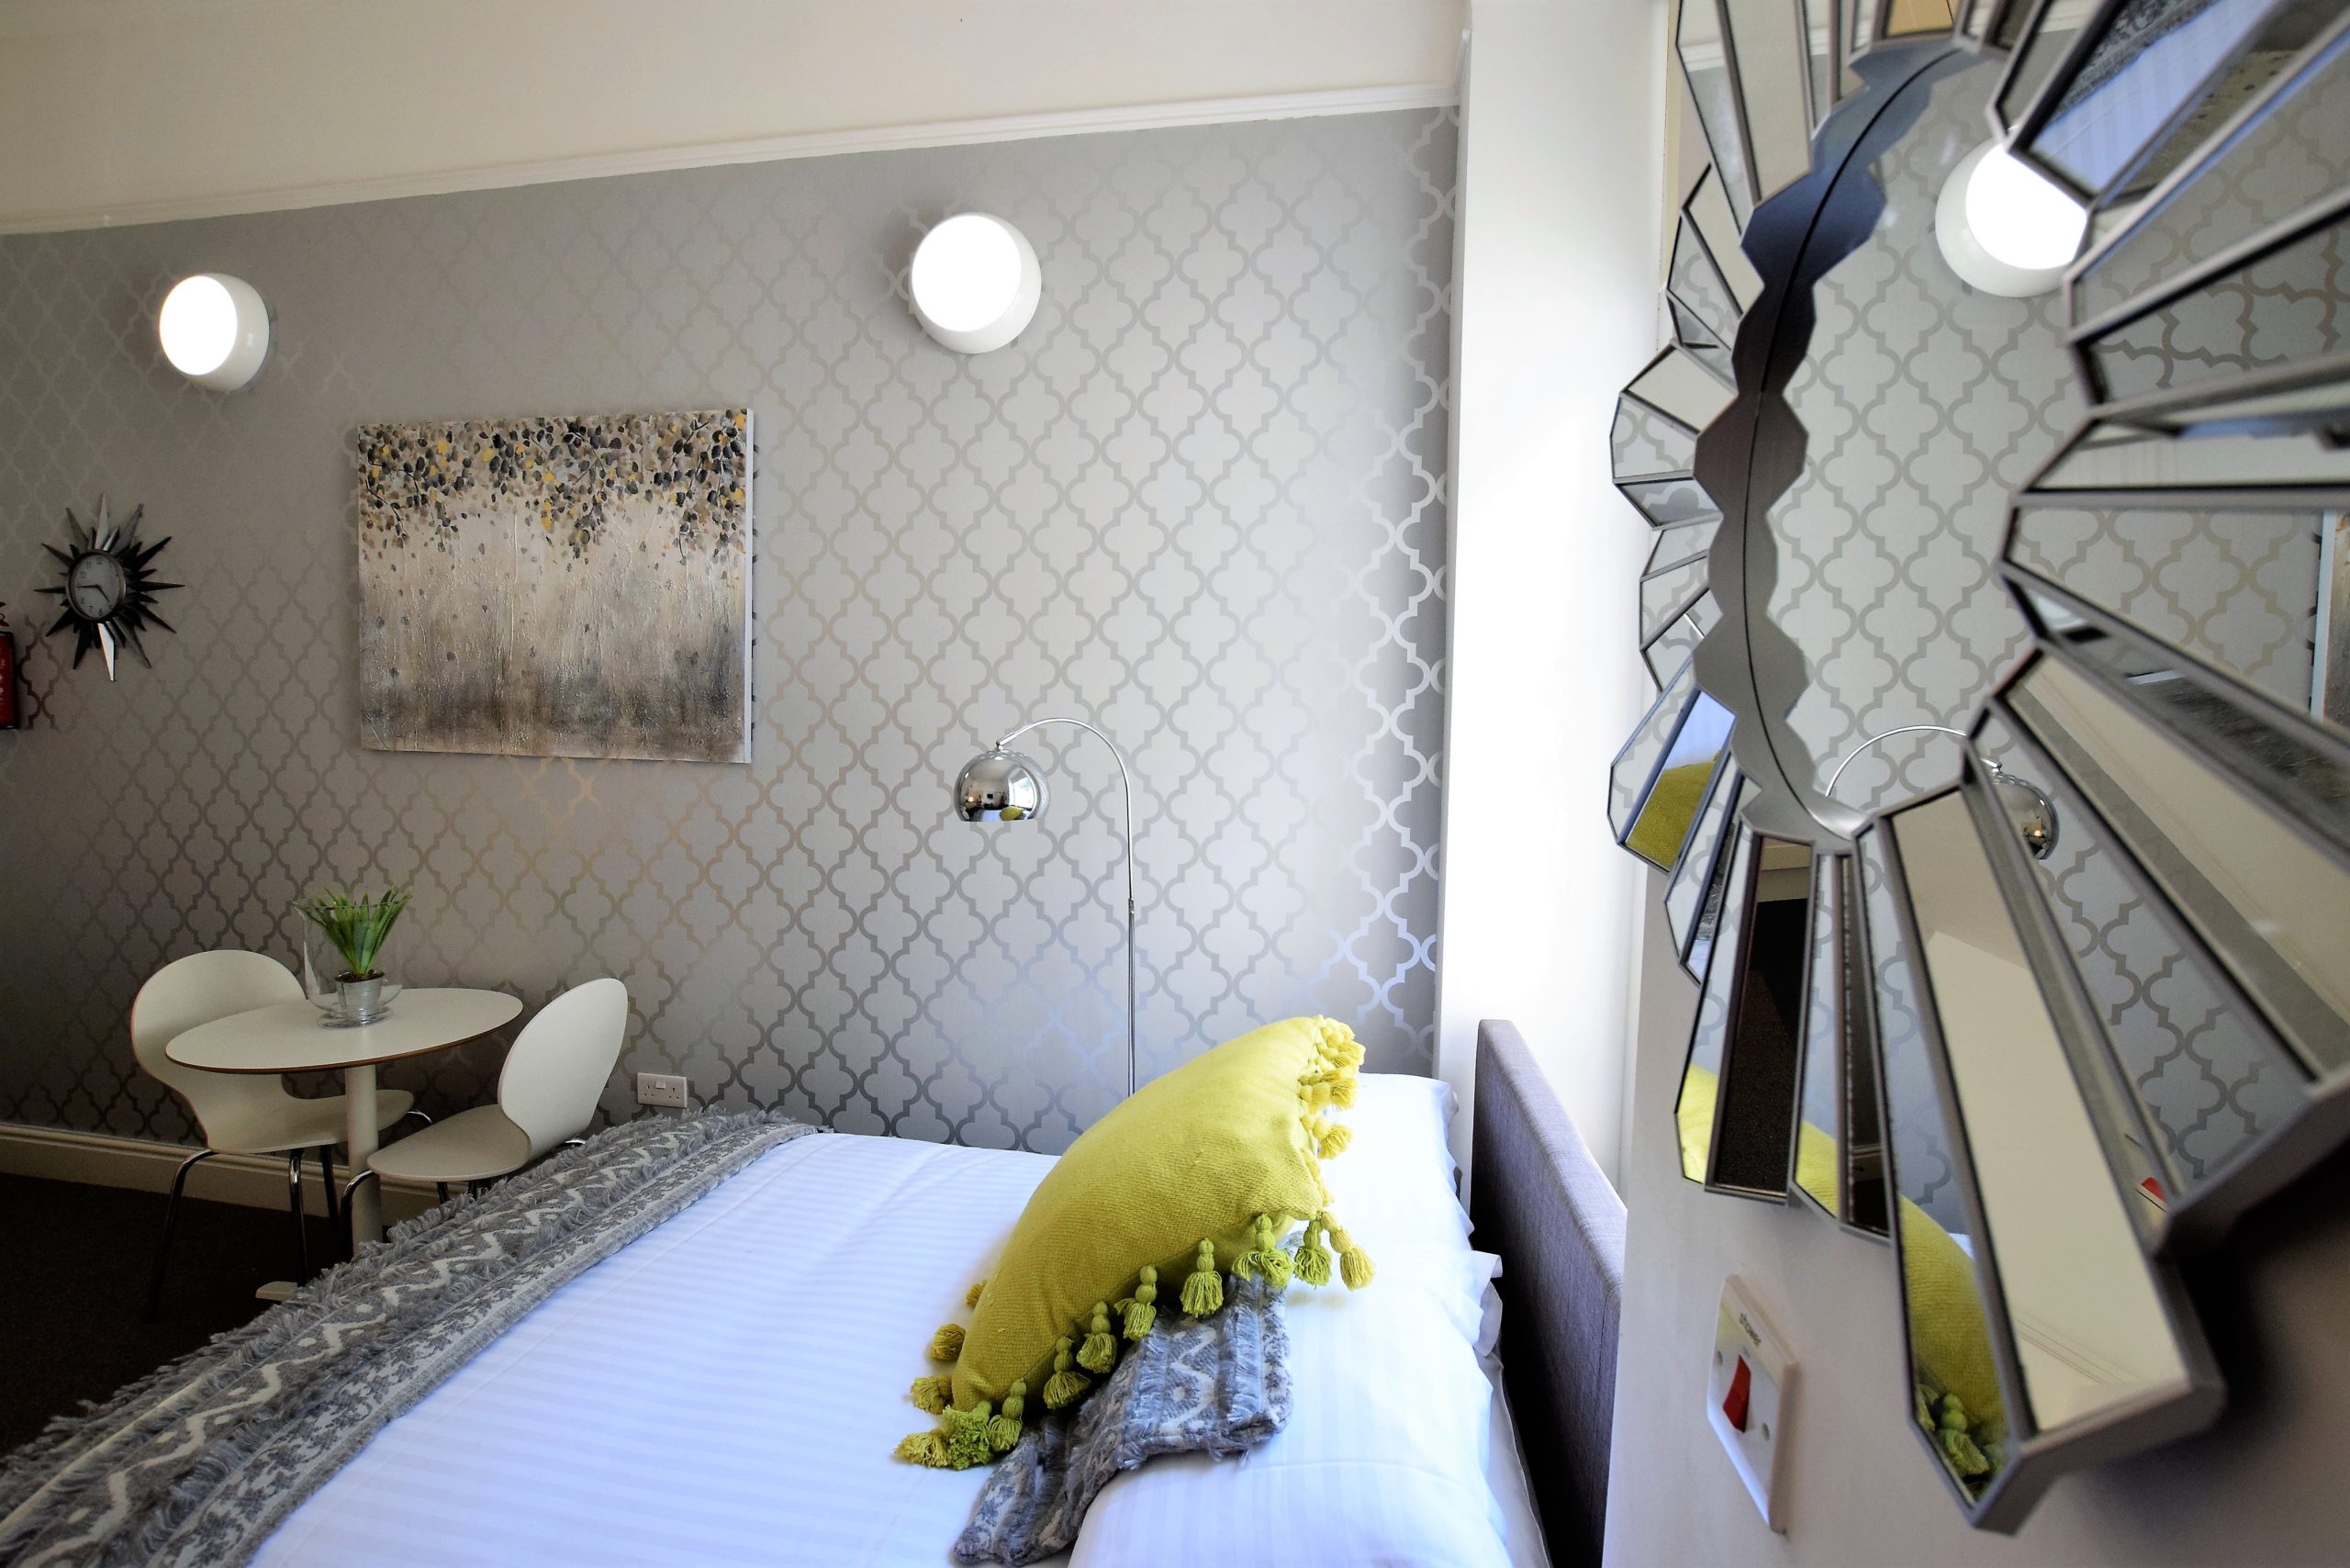 Berkeley Square No.7 - Serviced Apartment in Berkeley Square / Clifton - Your Apartment